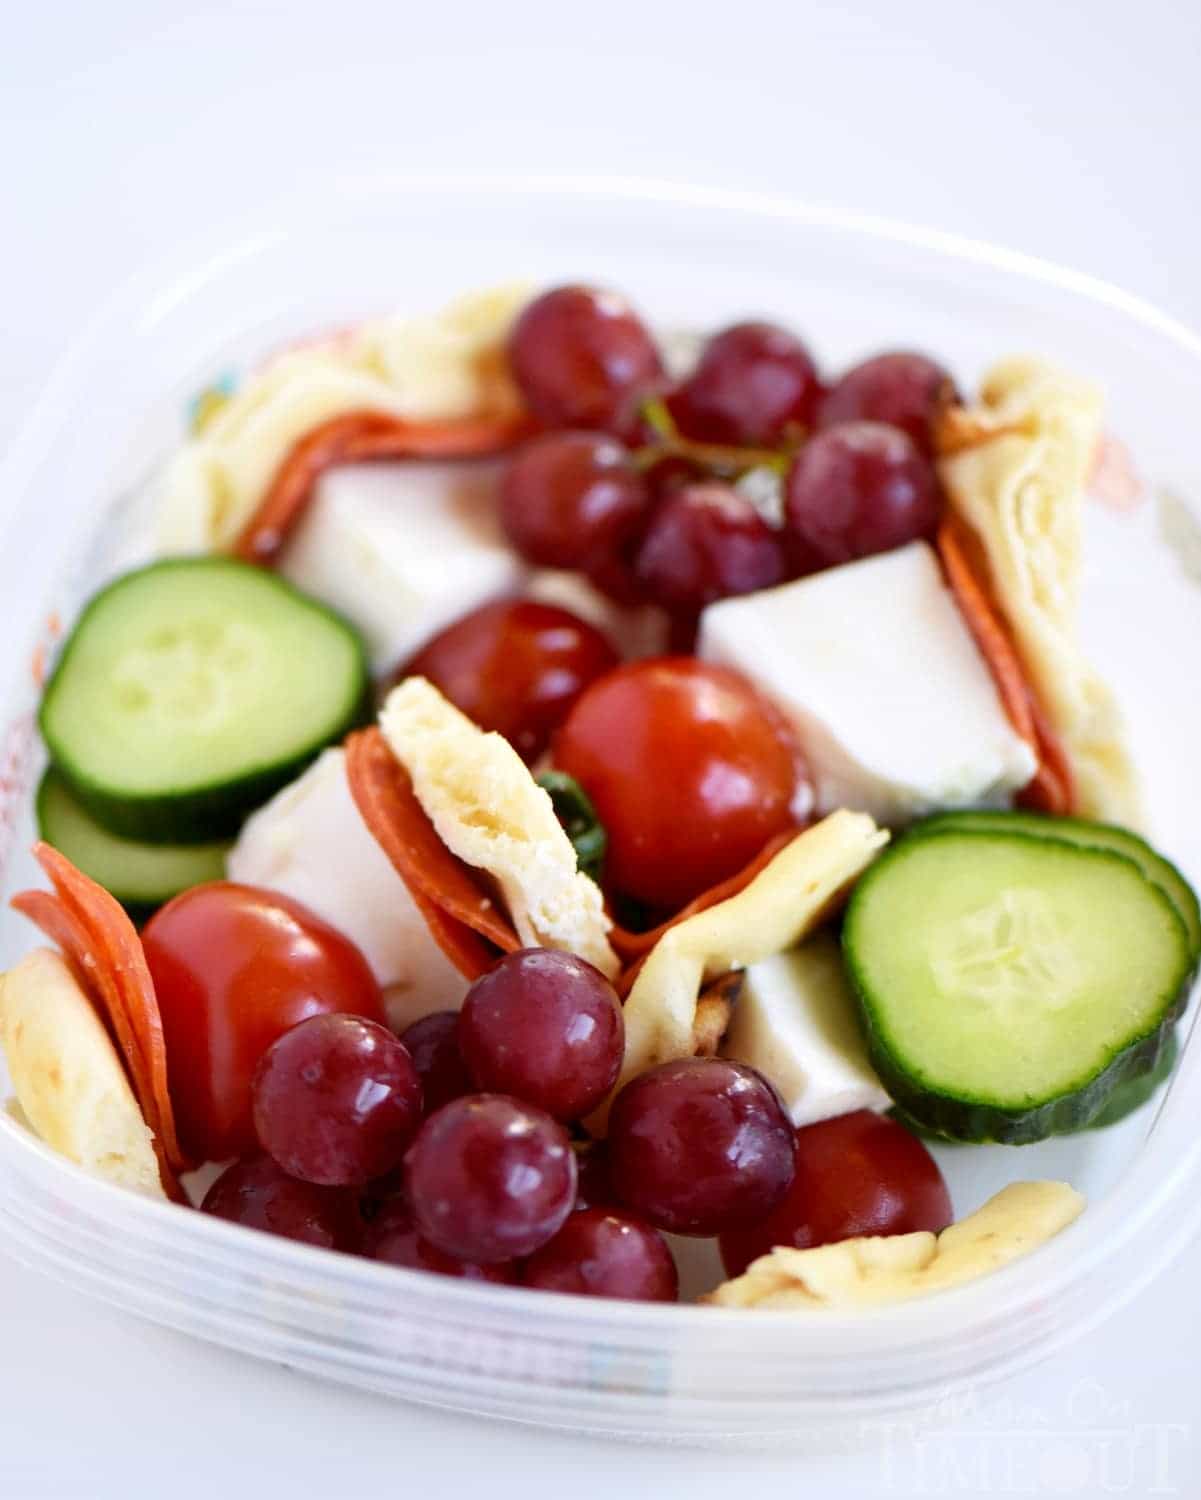 6 Easy Lunch Lunch Kabobs for Back to School from Mom on Time Out